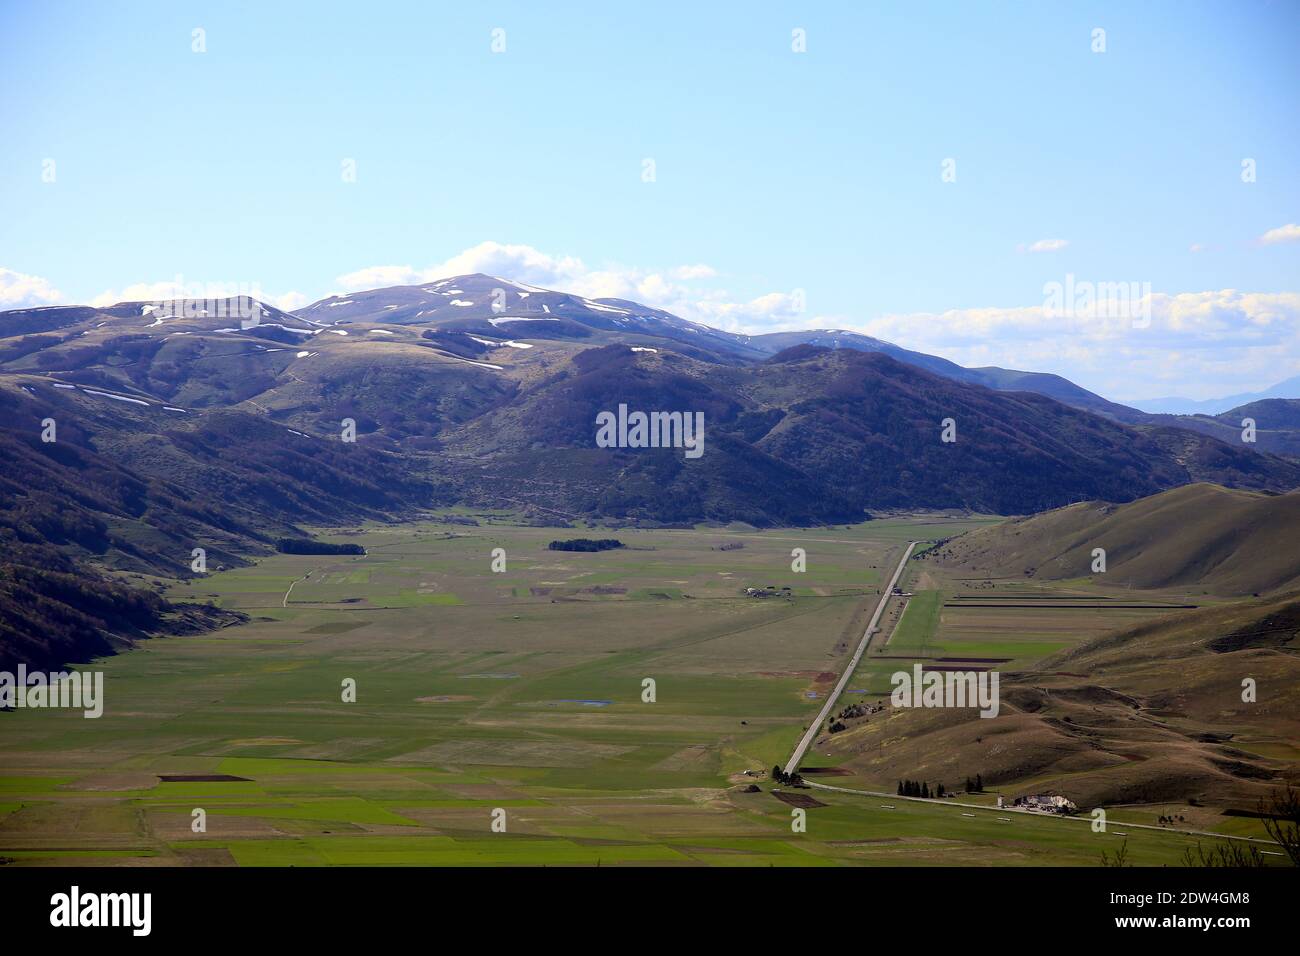 Top View Of The High Plateau Surrounded By Mountains, Piano Delle  Cinquemiglia, Abruzzo, Italy Stock Photo - Alamy